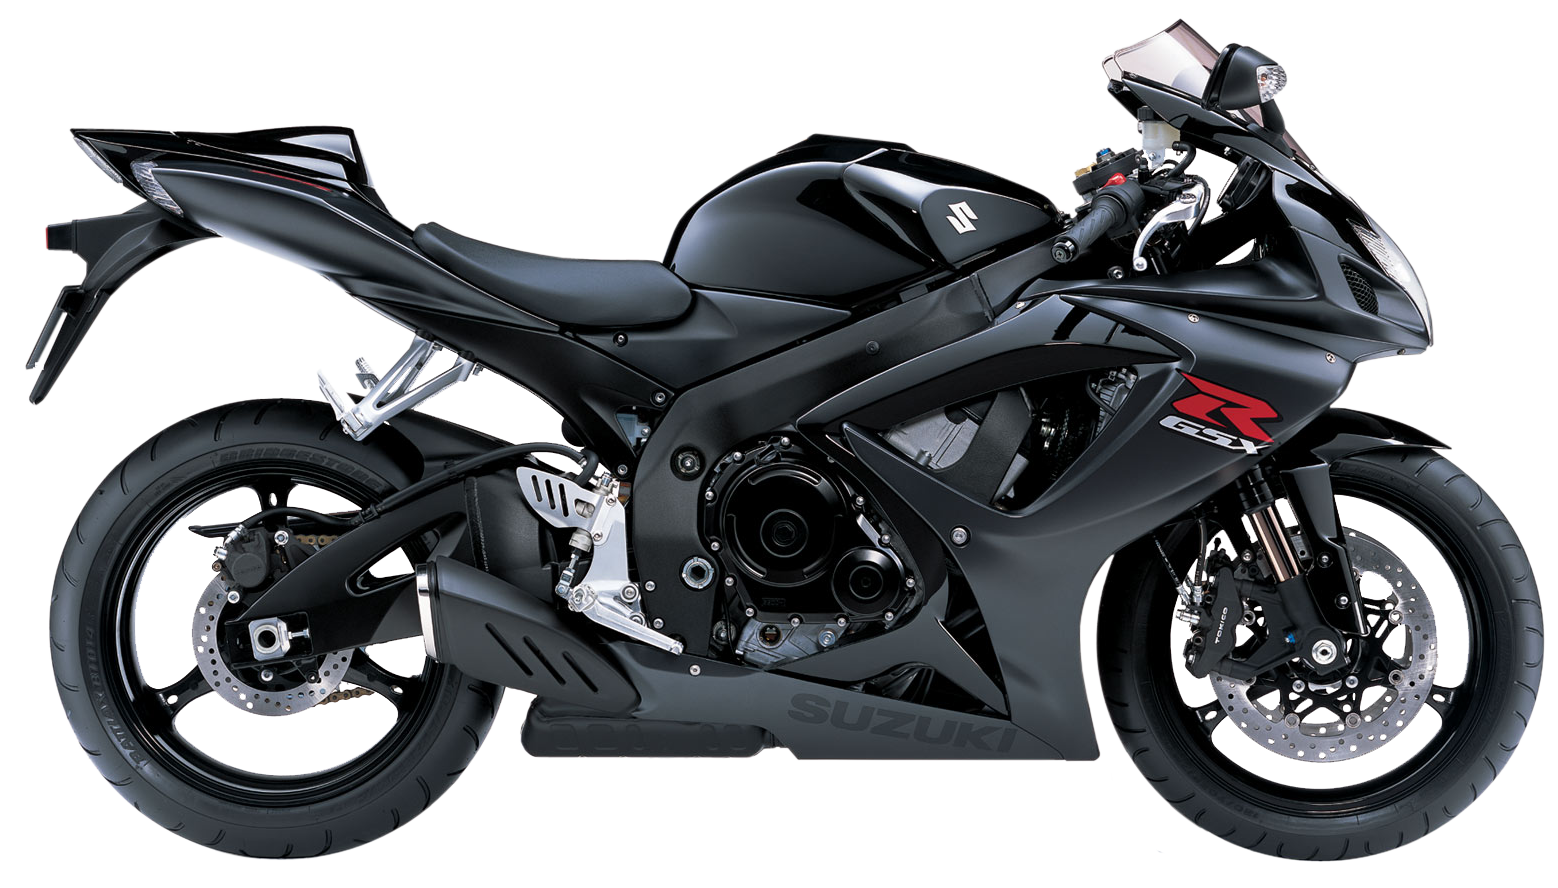 Moto Png Image Motorcycle Png Transparent Image Download Size 1558x888px